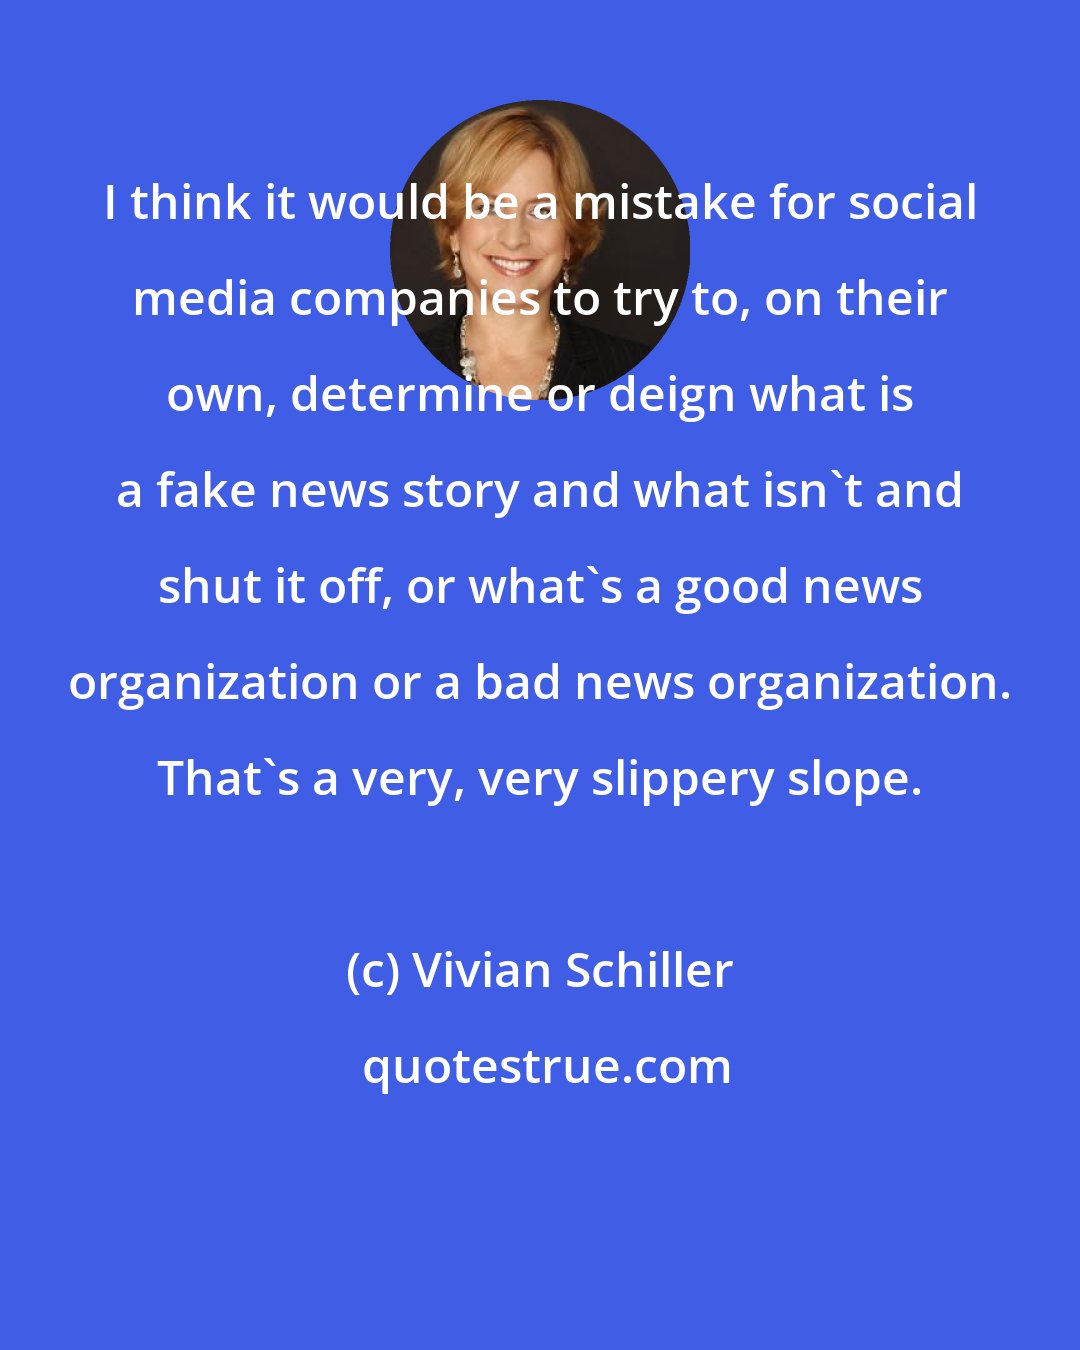 Vivian Schiller: I think it would be a mistake for social media companies to try to, on their own, determine or deign what is a fake news story and what isn't and shut it off, or what's a good news organization or a bad news organization. That's a very, very slippery slope.